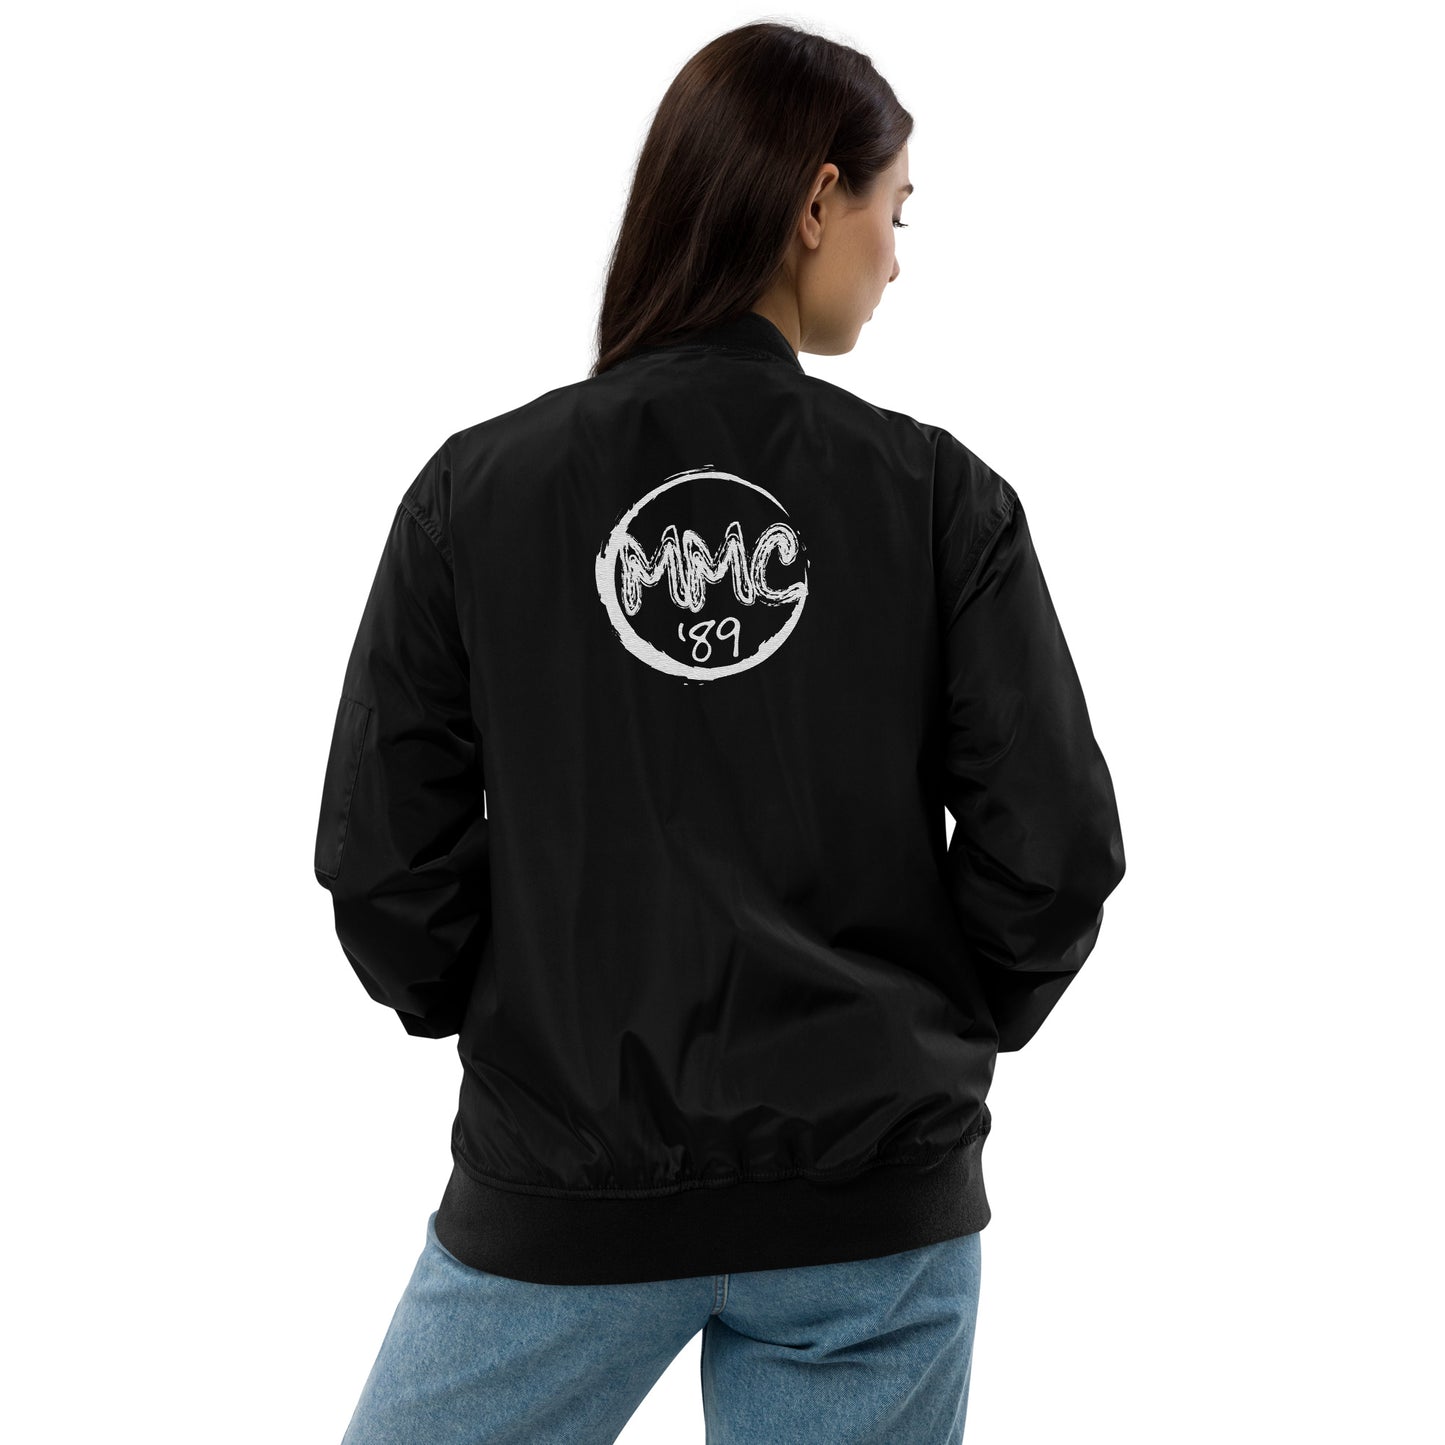 CLUBHOUSE EXCLUSIVE - Changemakers / MMC'89 Premium Recycled Bomber Jacket